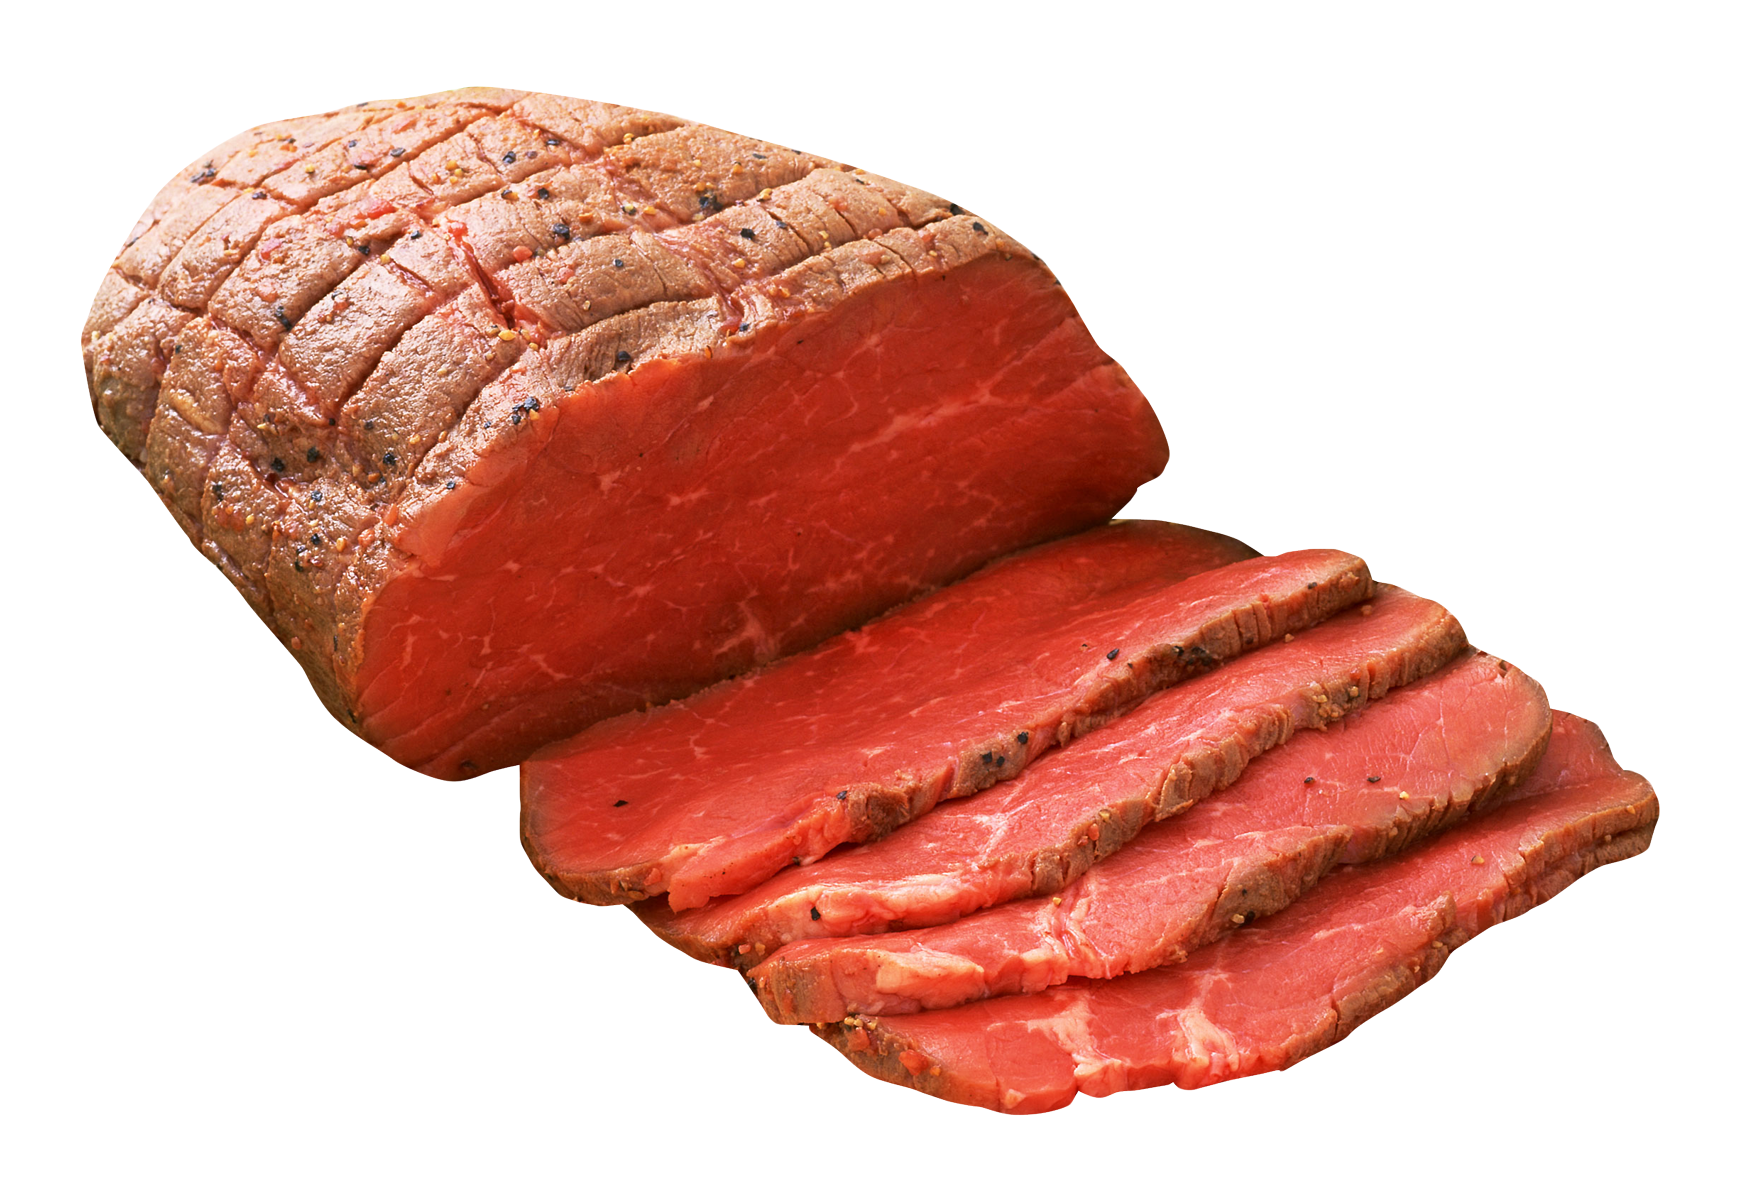 A Sliced Meat On A Black Background